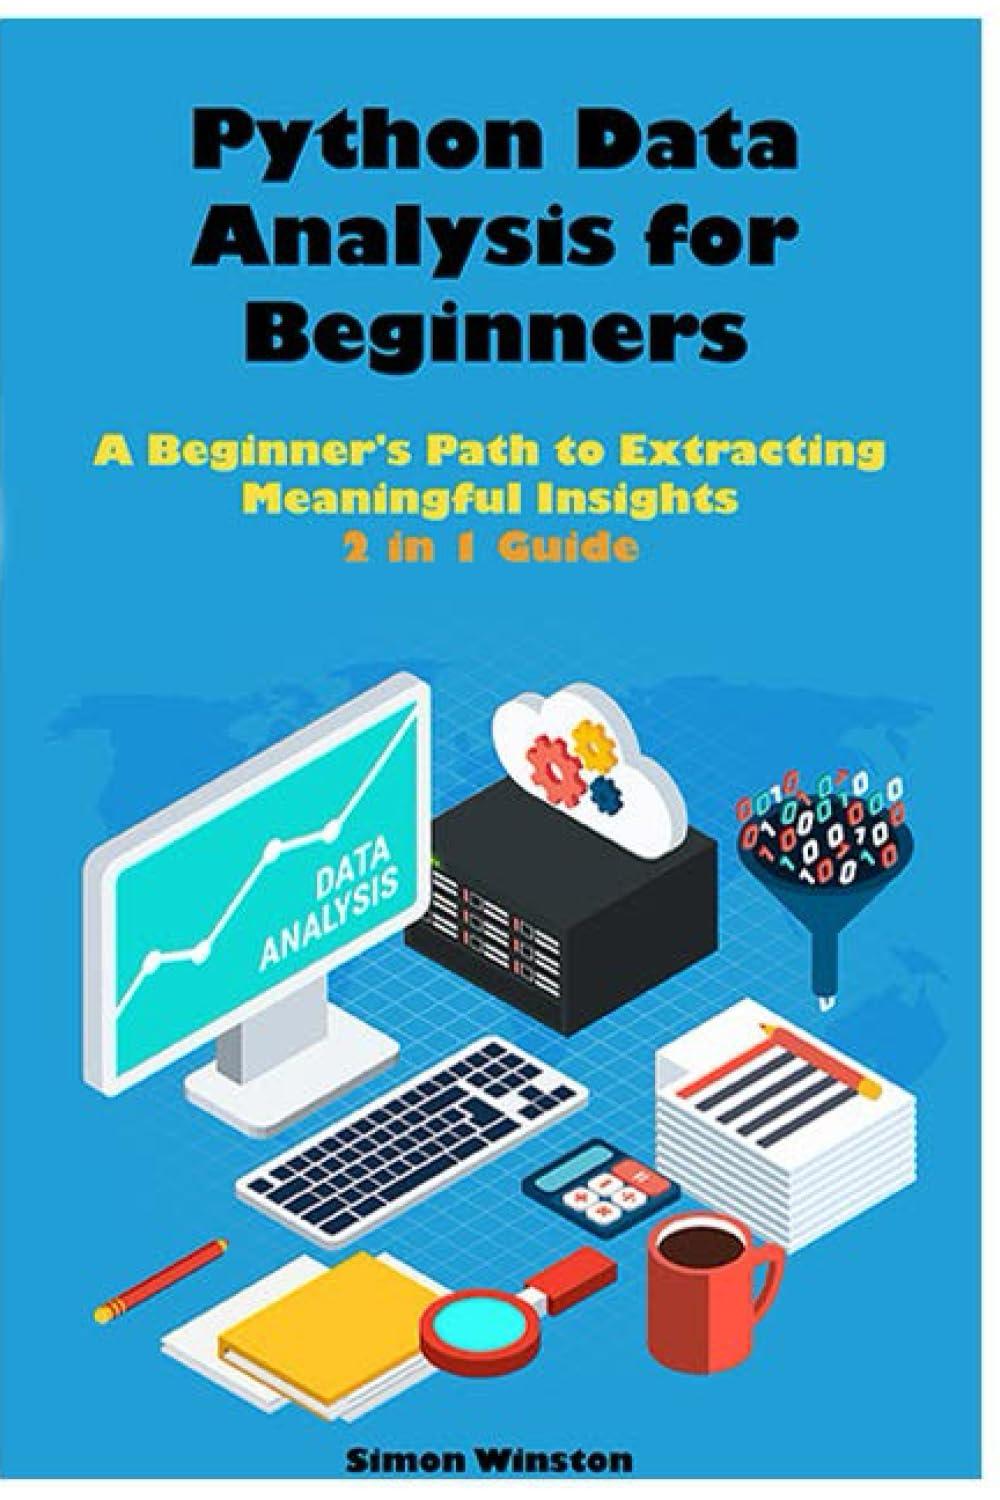 python data analysis for beginners 2 in 1 guide a beginner's path to extracting meaningful insights 1st